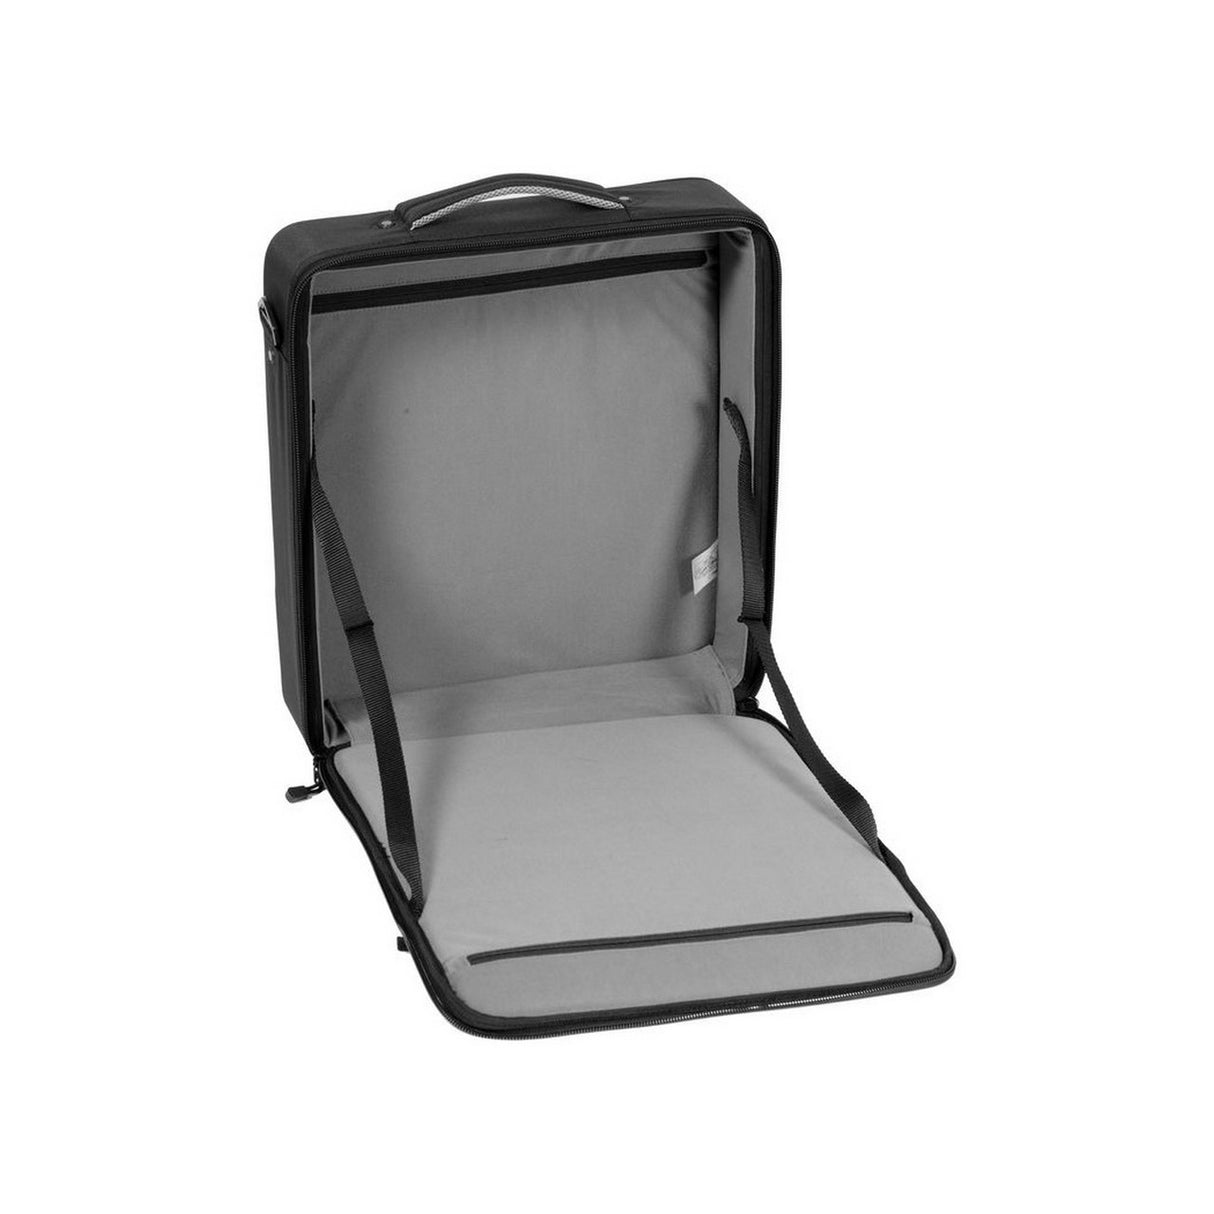 Litepanels 900-3521 | Light Carry Case For 1 Astra 1 x 1